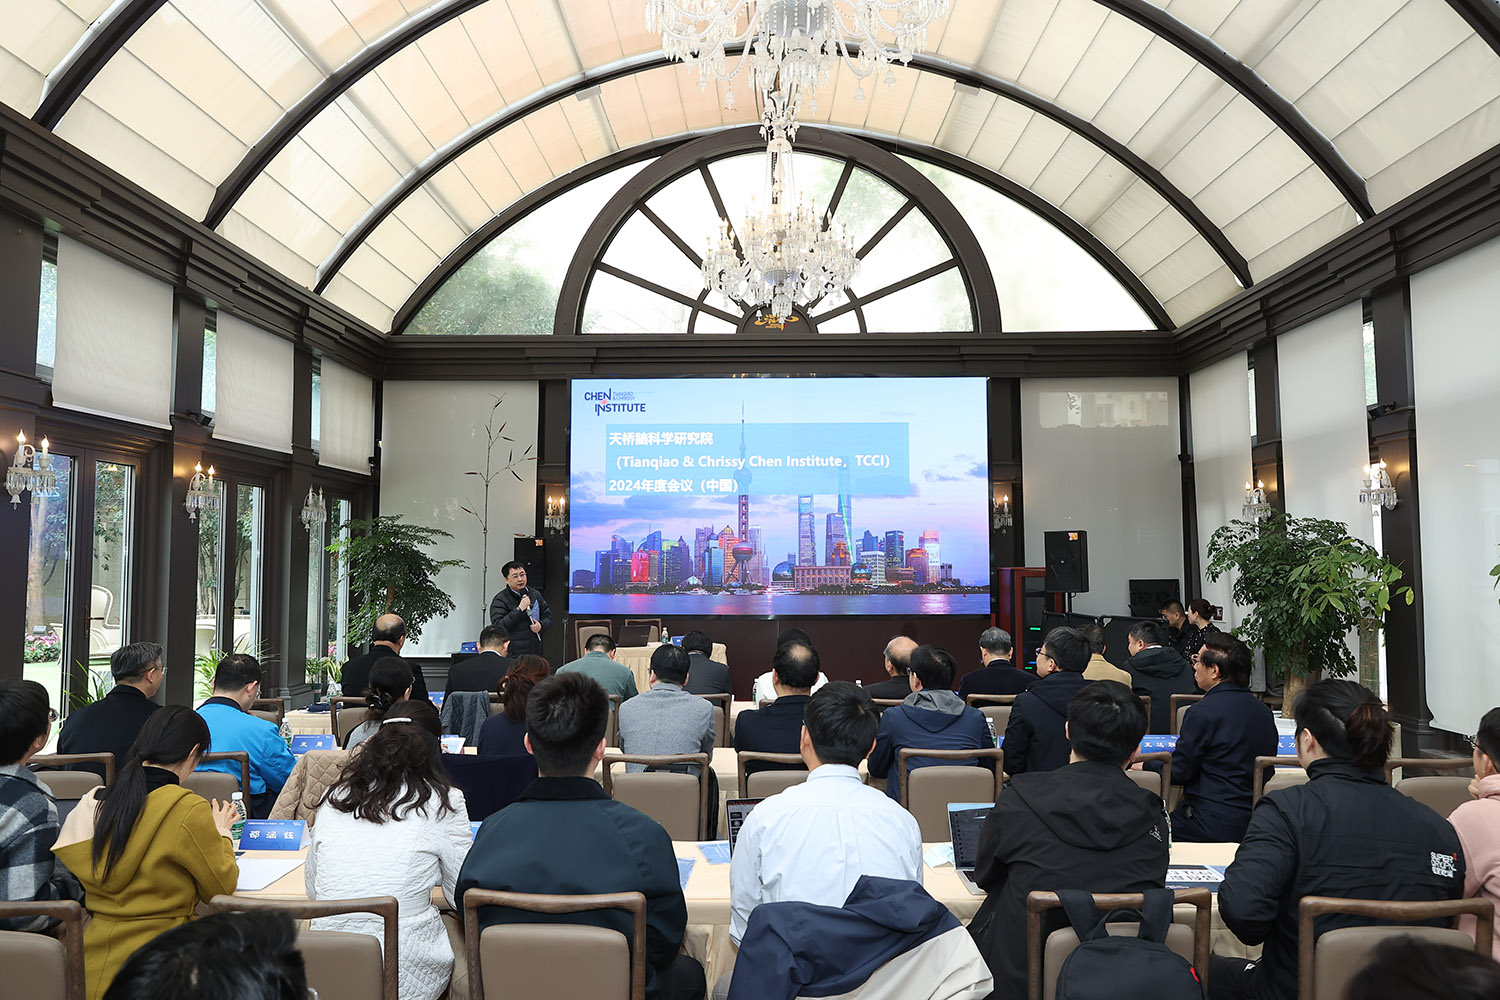 TCCI Hosts Annual Conference for Chinese Investigators Tianqiao Chen: Focusing on Two Directions to Promote AI + Brain Science